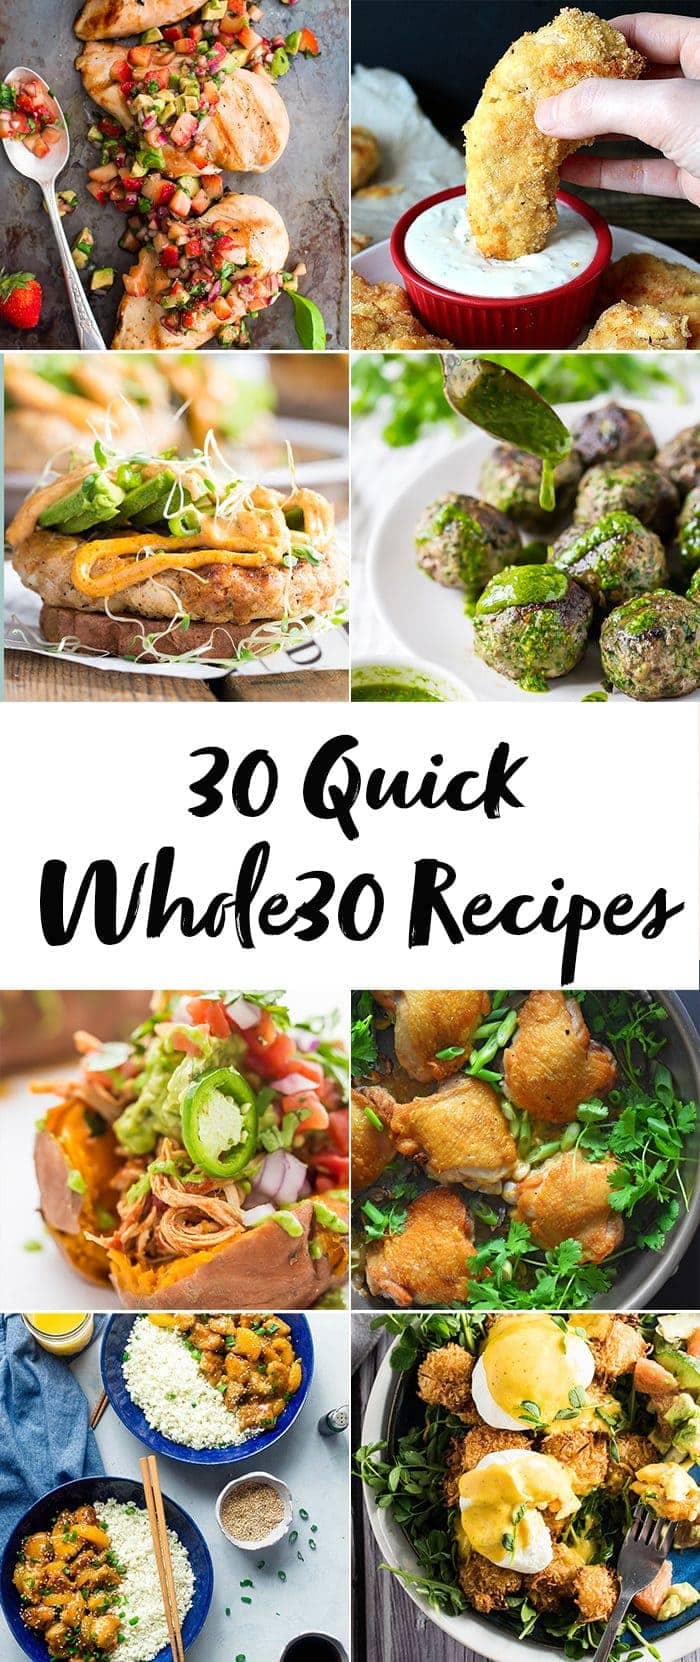 These 30 quick Whole30 recipes are full of flavor but low on time spent in the kitchen! Some of my favorite Whole30 dinner recipes, you'll love each of these for their simplicity and deliciousness. Yep, these quick Whole30 recipes might just save your round...